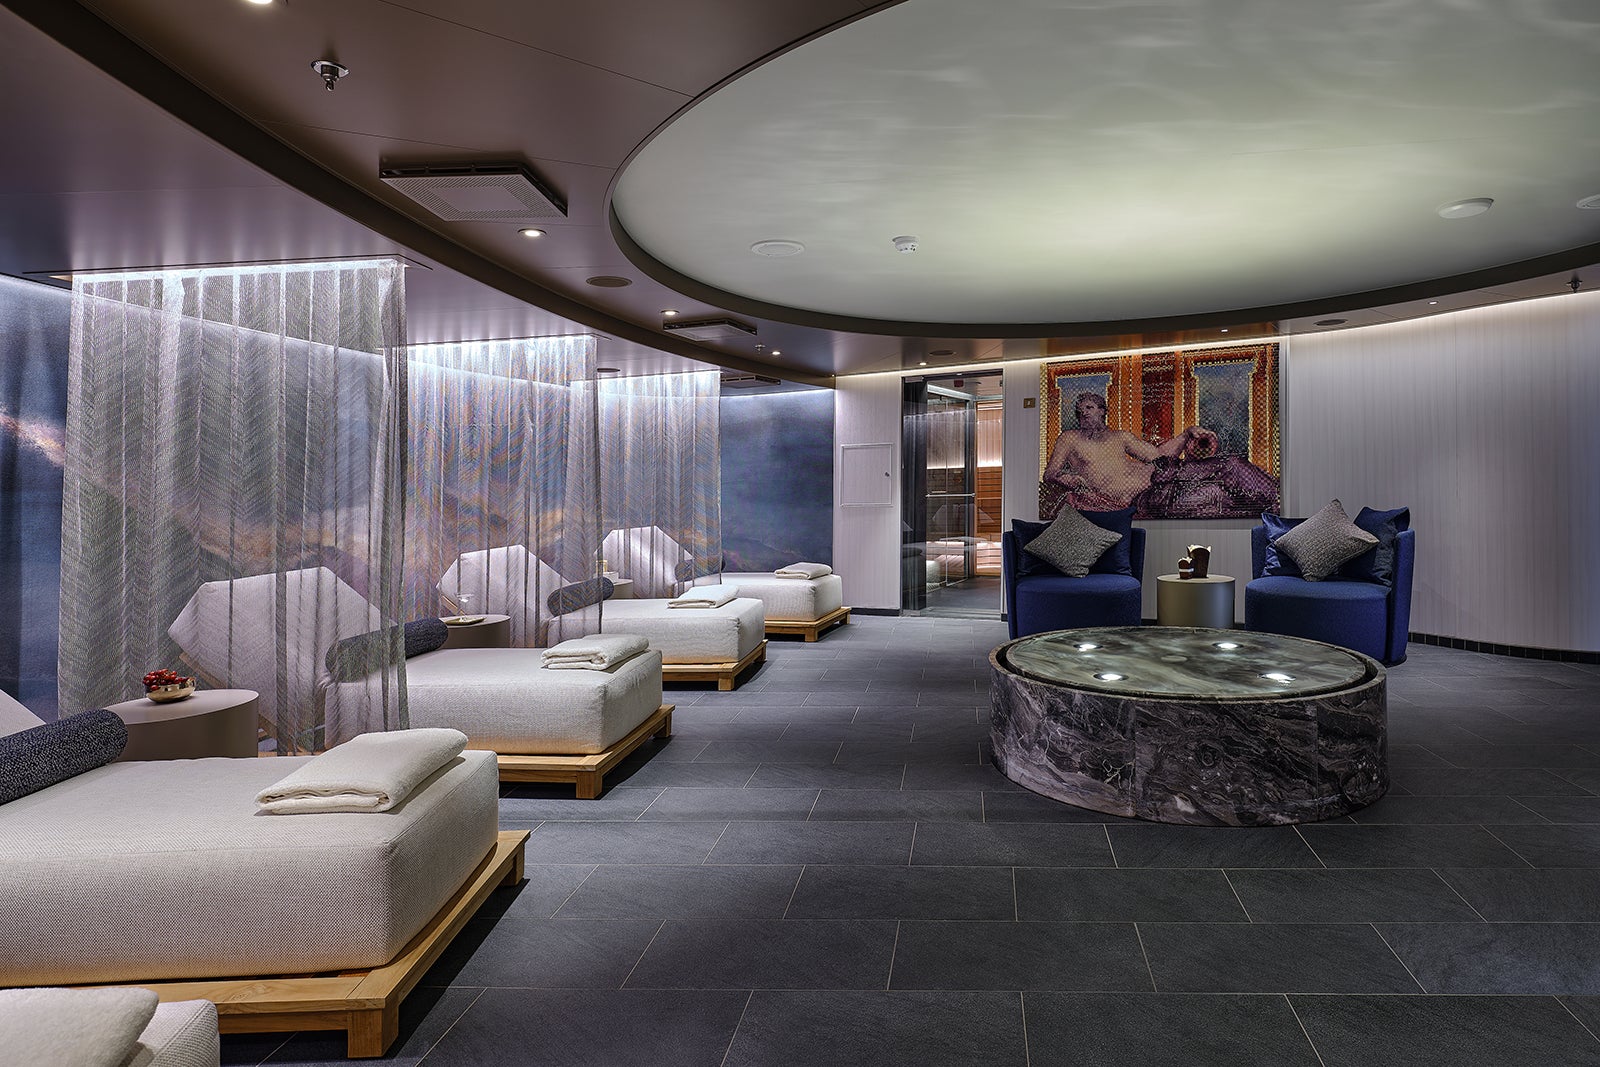 celebrity cruise thermal suite